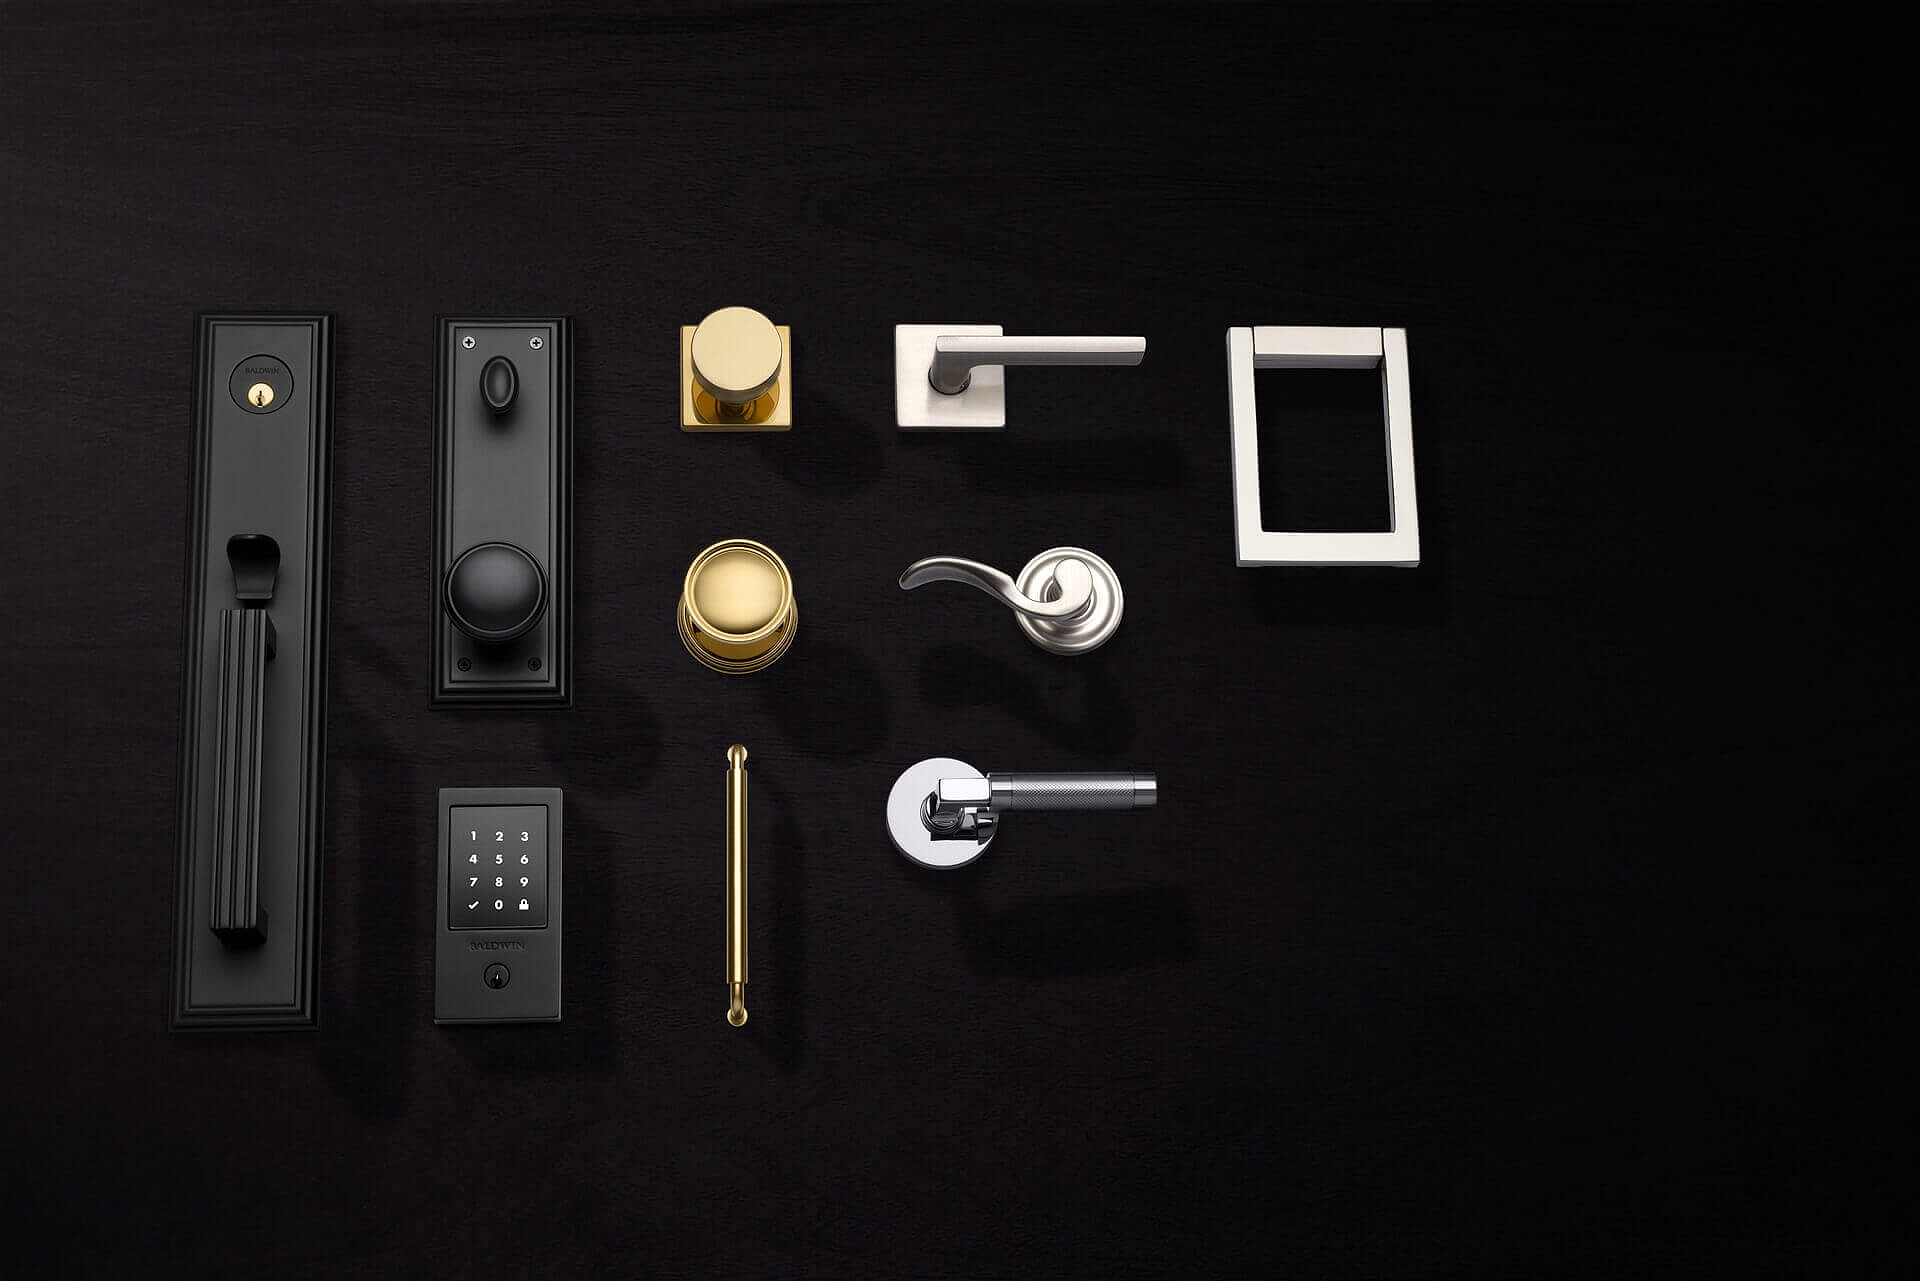 Door Hardware 101: Types, Functions and Finishes